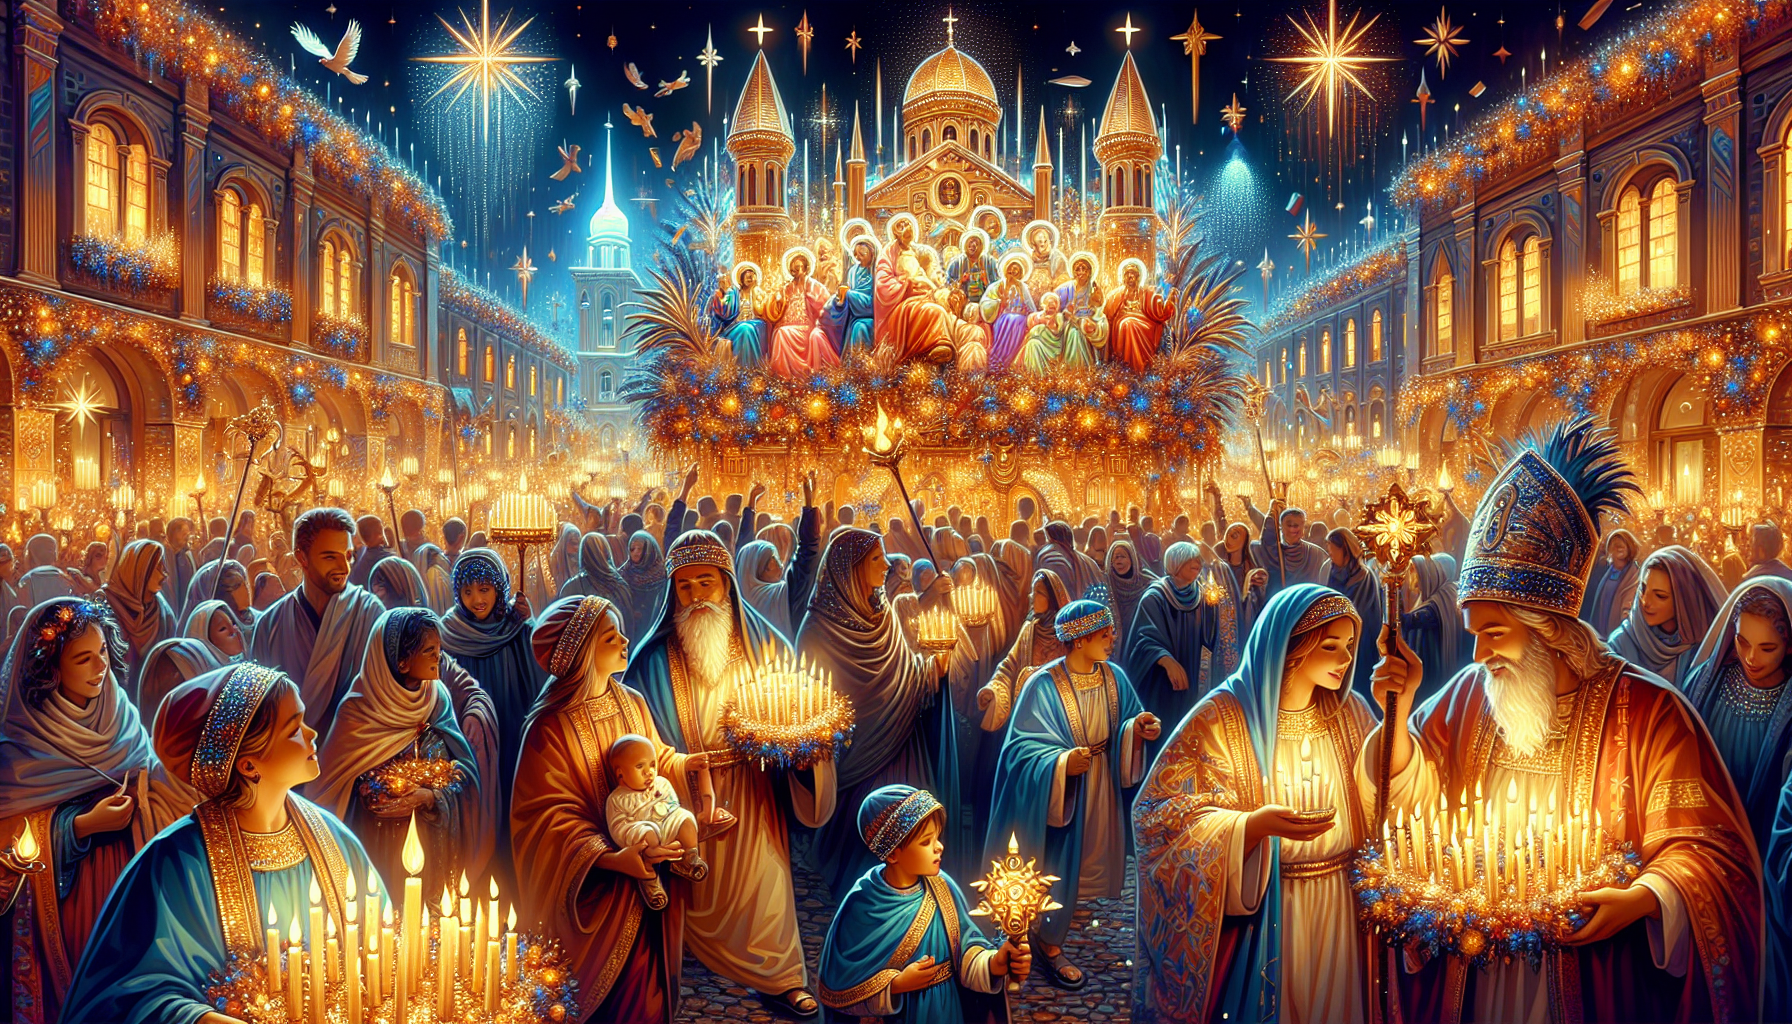 Create an image depicting a joyful celebration of the Epiphany festival. Show a vibrant scene with people of all ages participating in traditional activities. There could be a parade with colorful flo